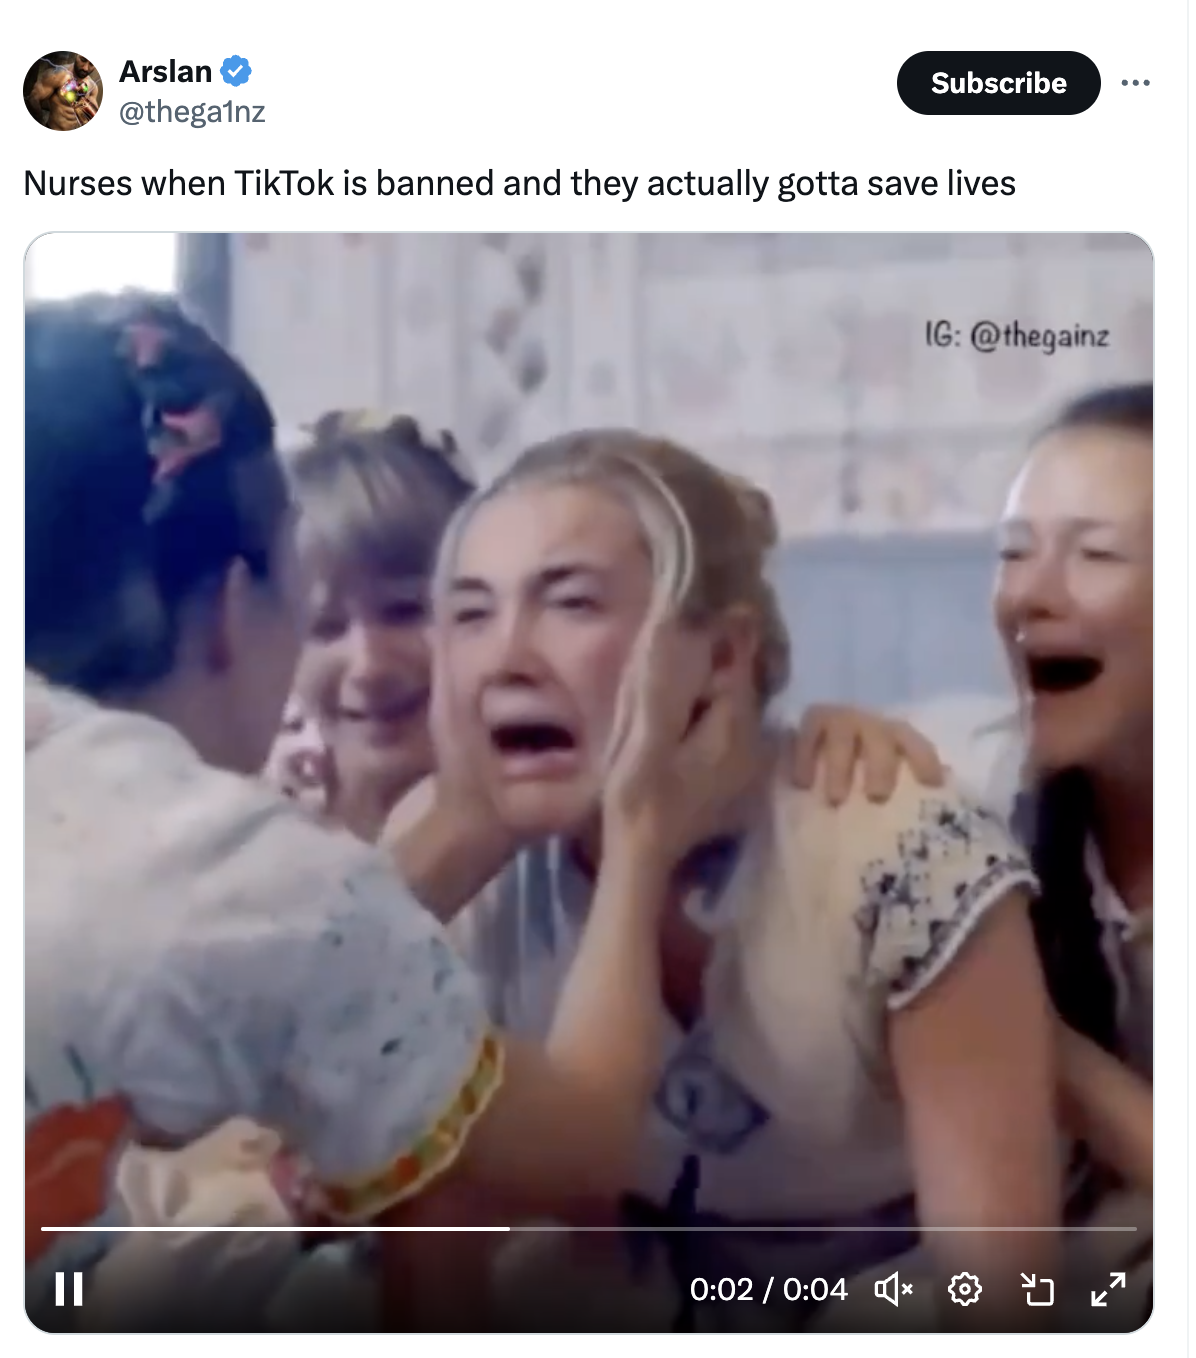 midsommar cry scene - Arslan Subscribe Nurses when TikTok is banned and they actually gotta save lives Ig